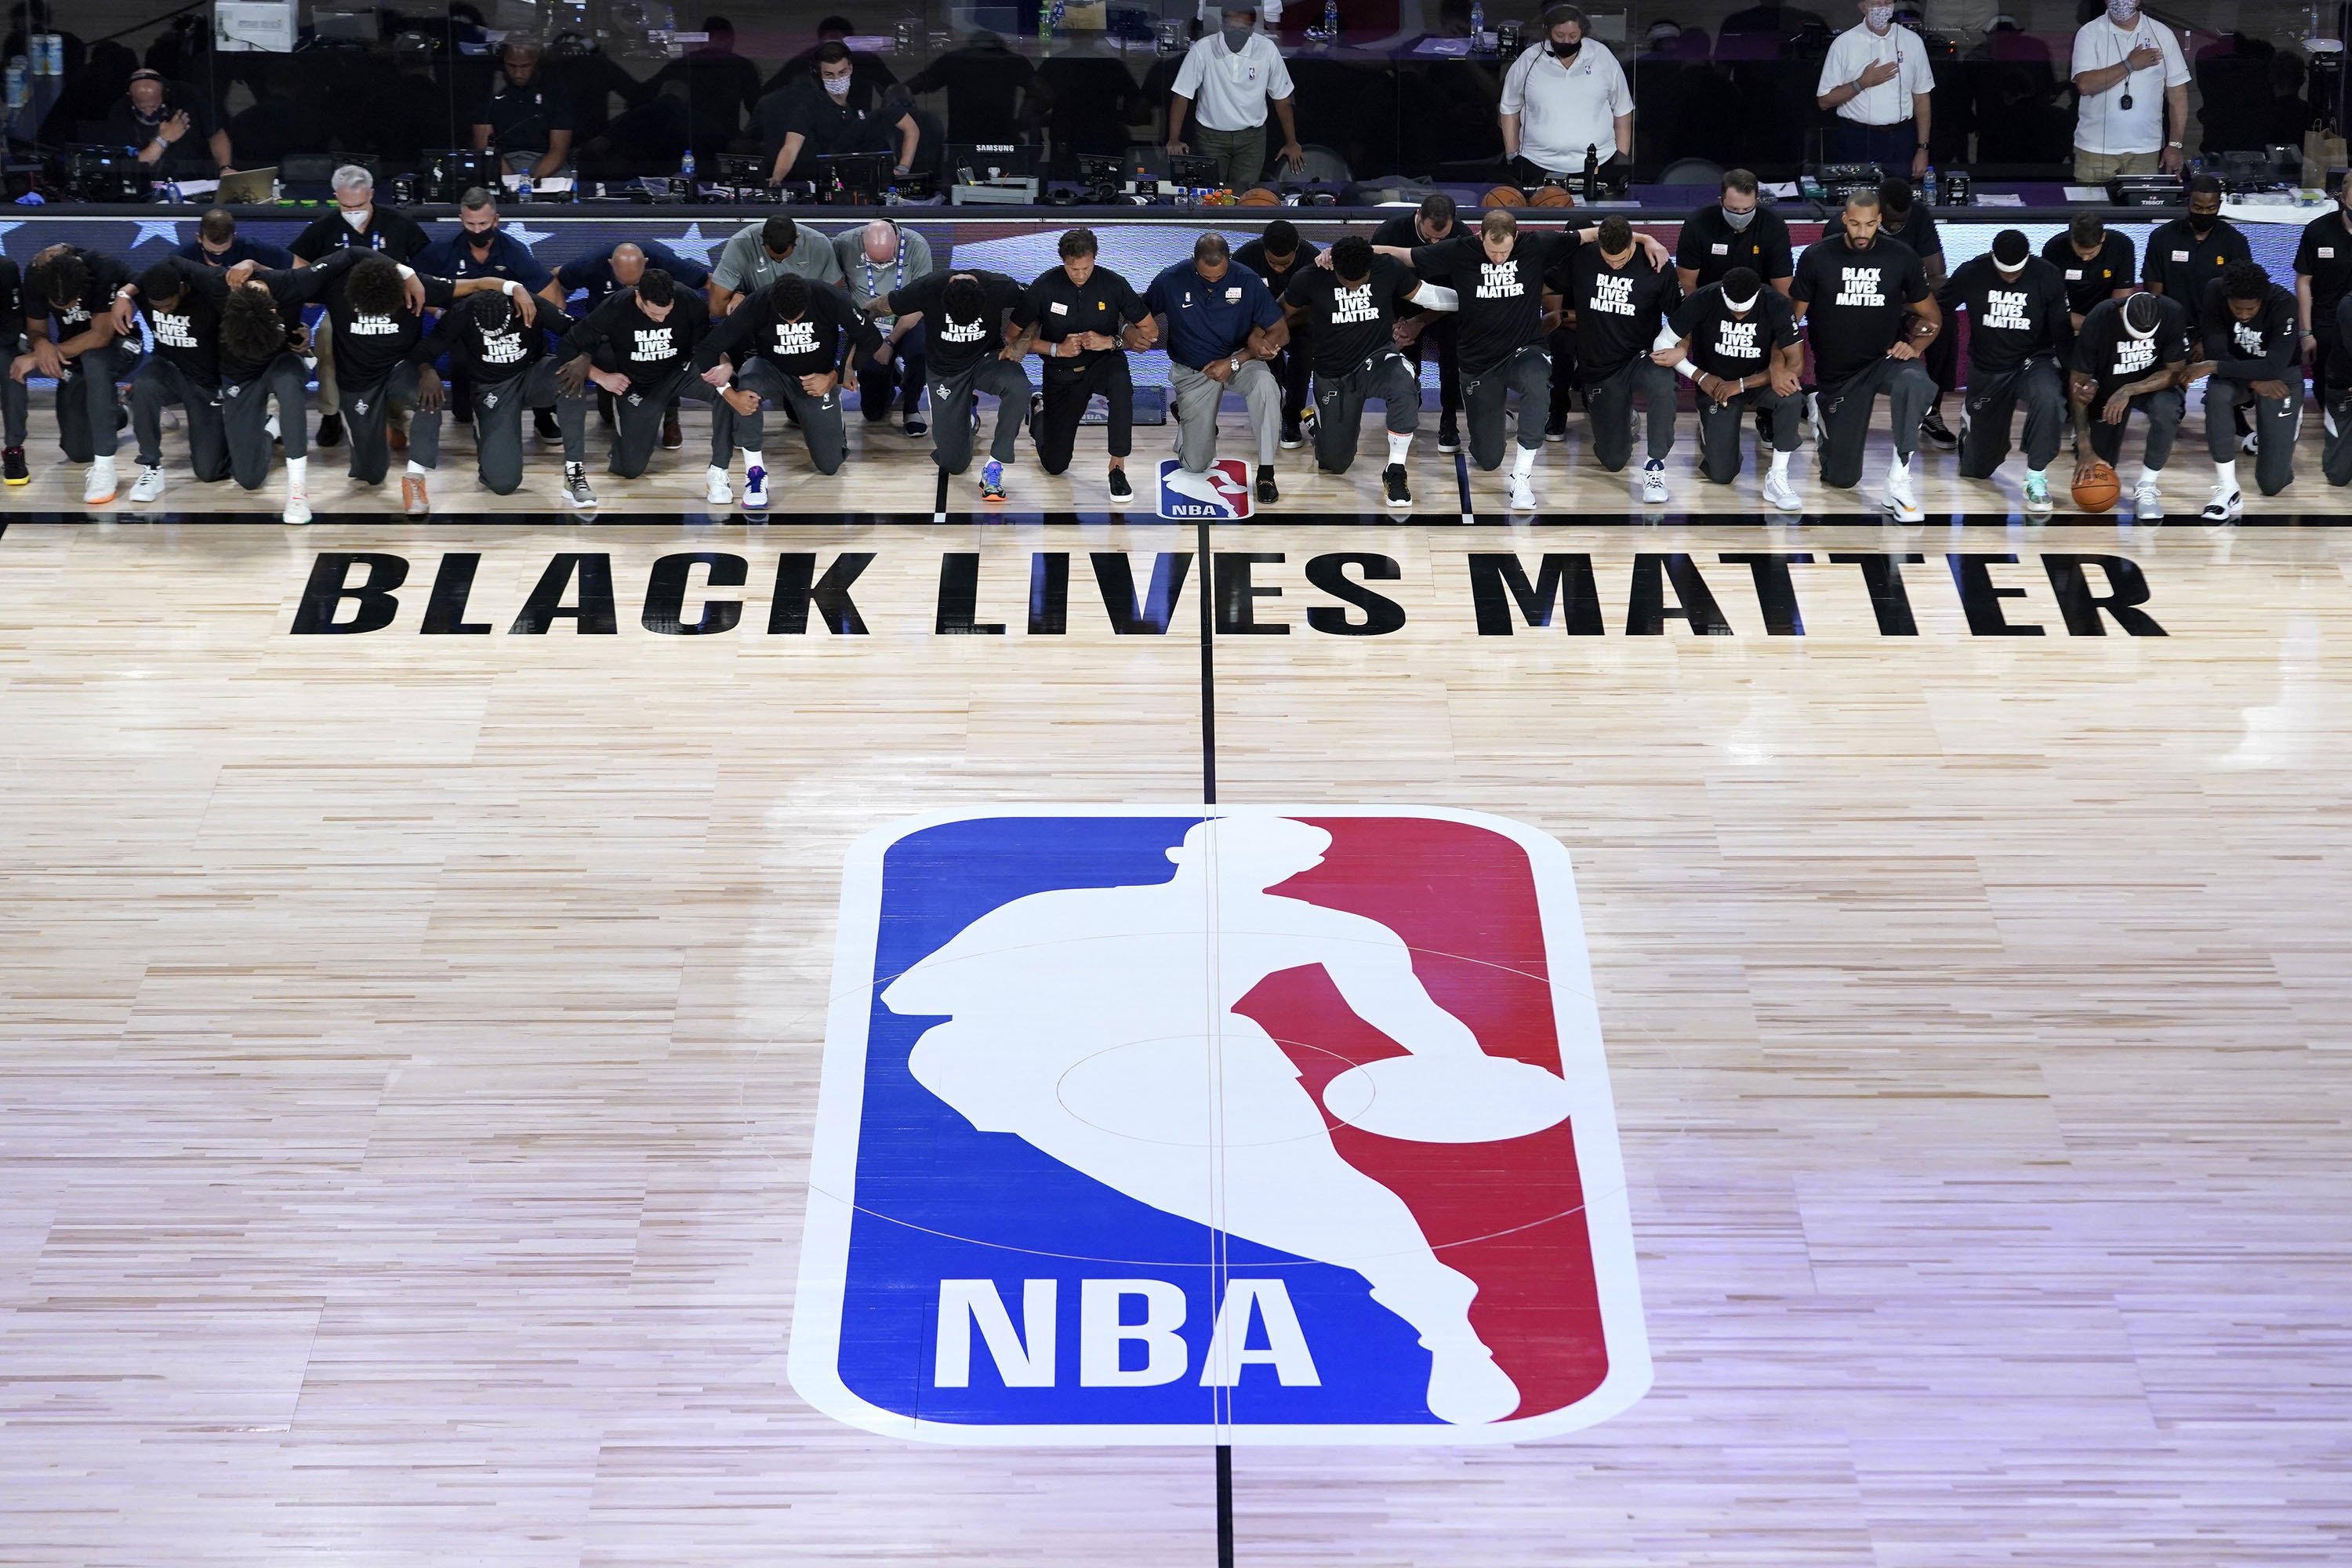 Kyrie Irving demands NBA to change its logo: 'BLACK KINGS BUILT